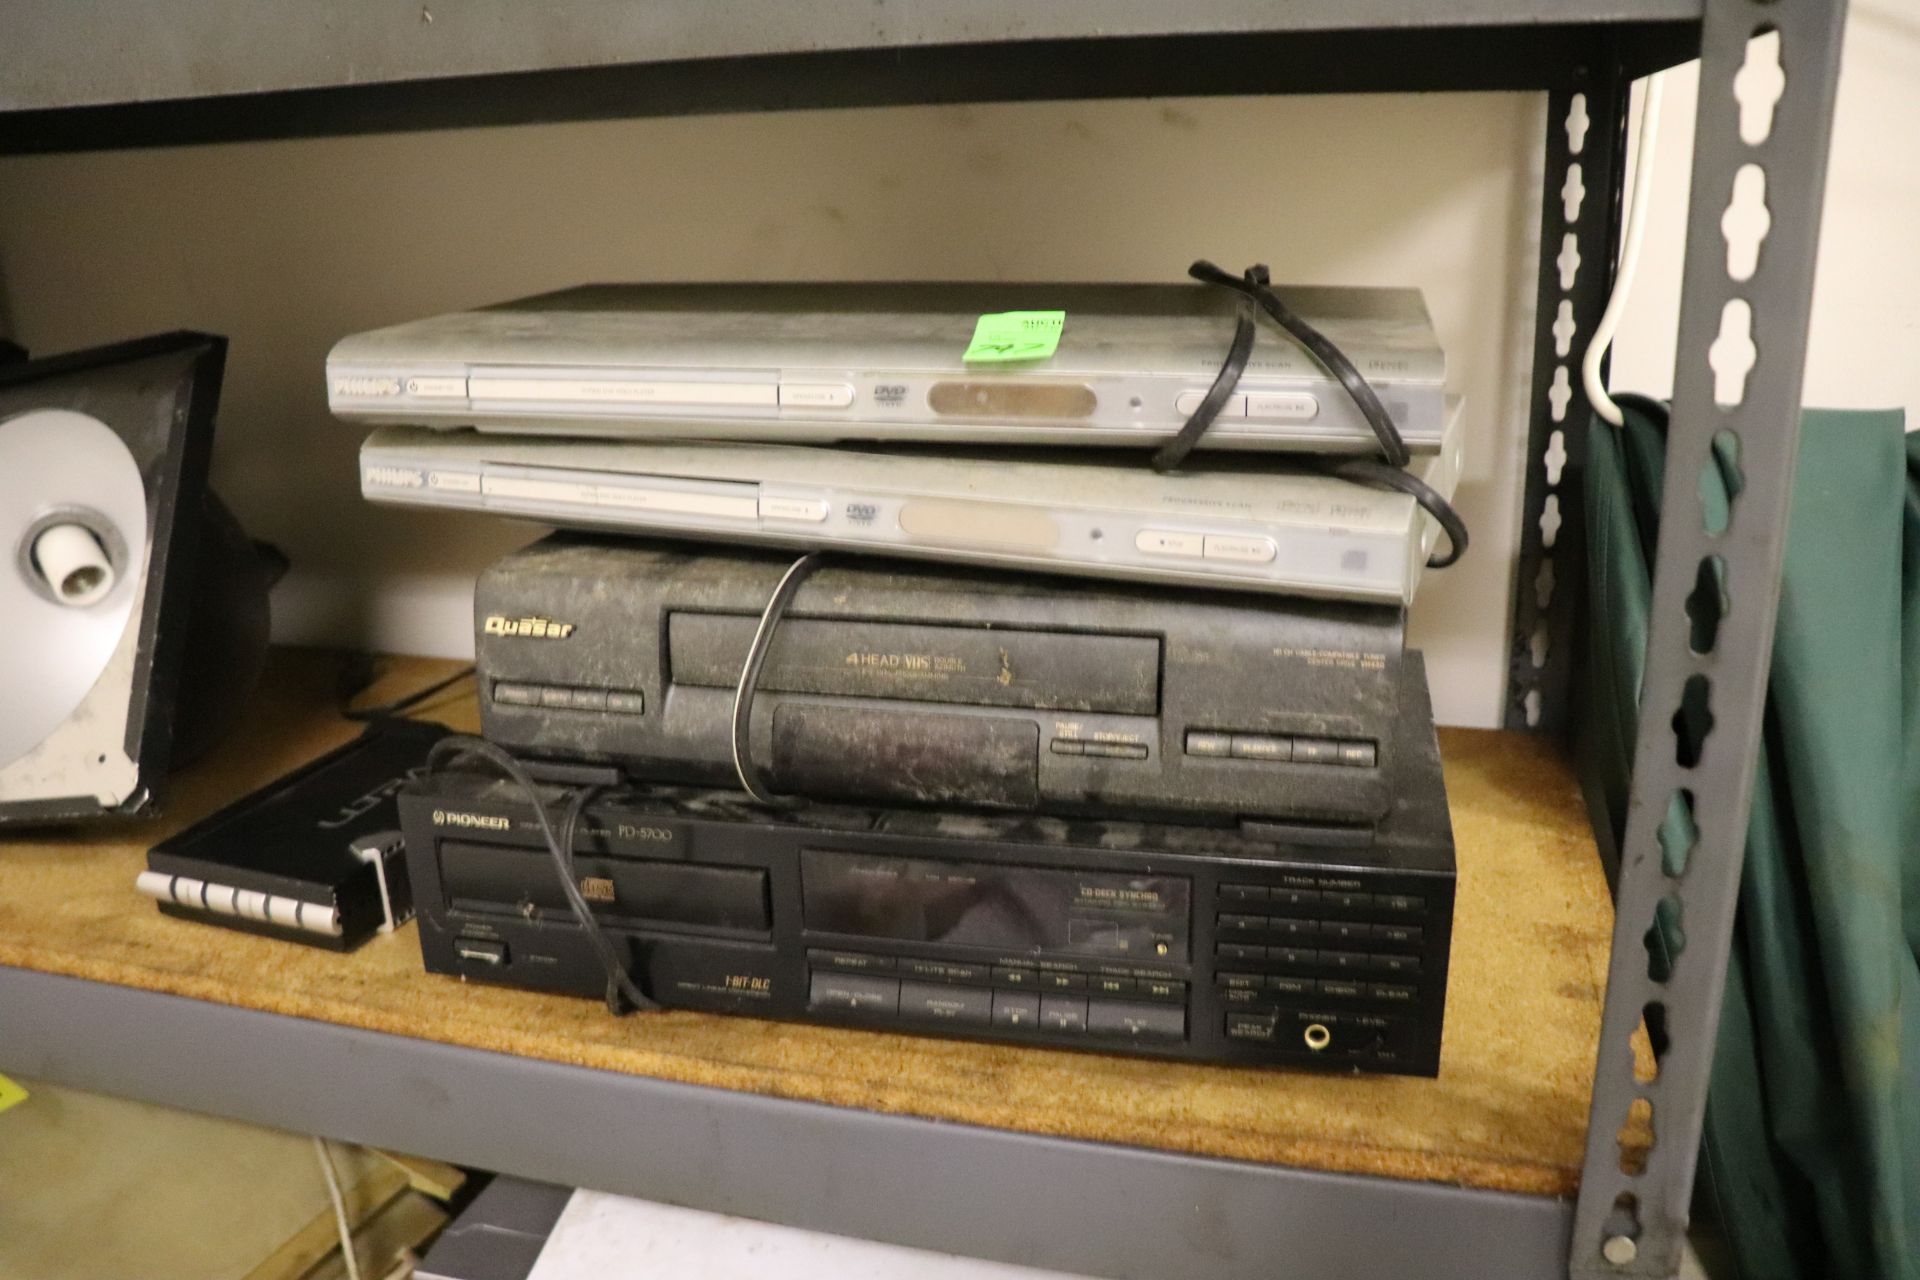 Two Philips DVD players, Questar VHS player, and a Pioneer PD-5700 CD changer